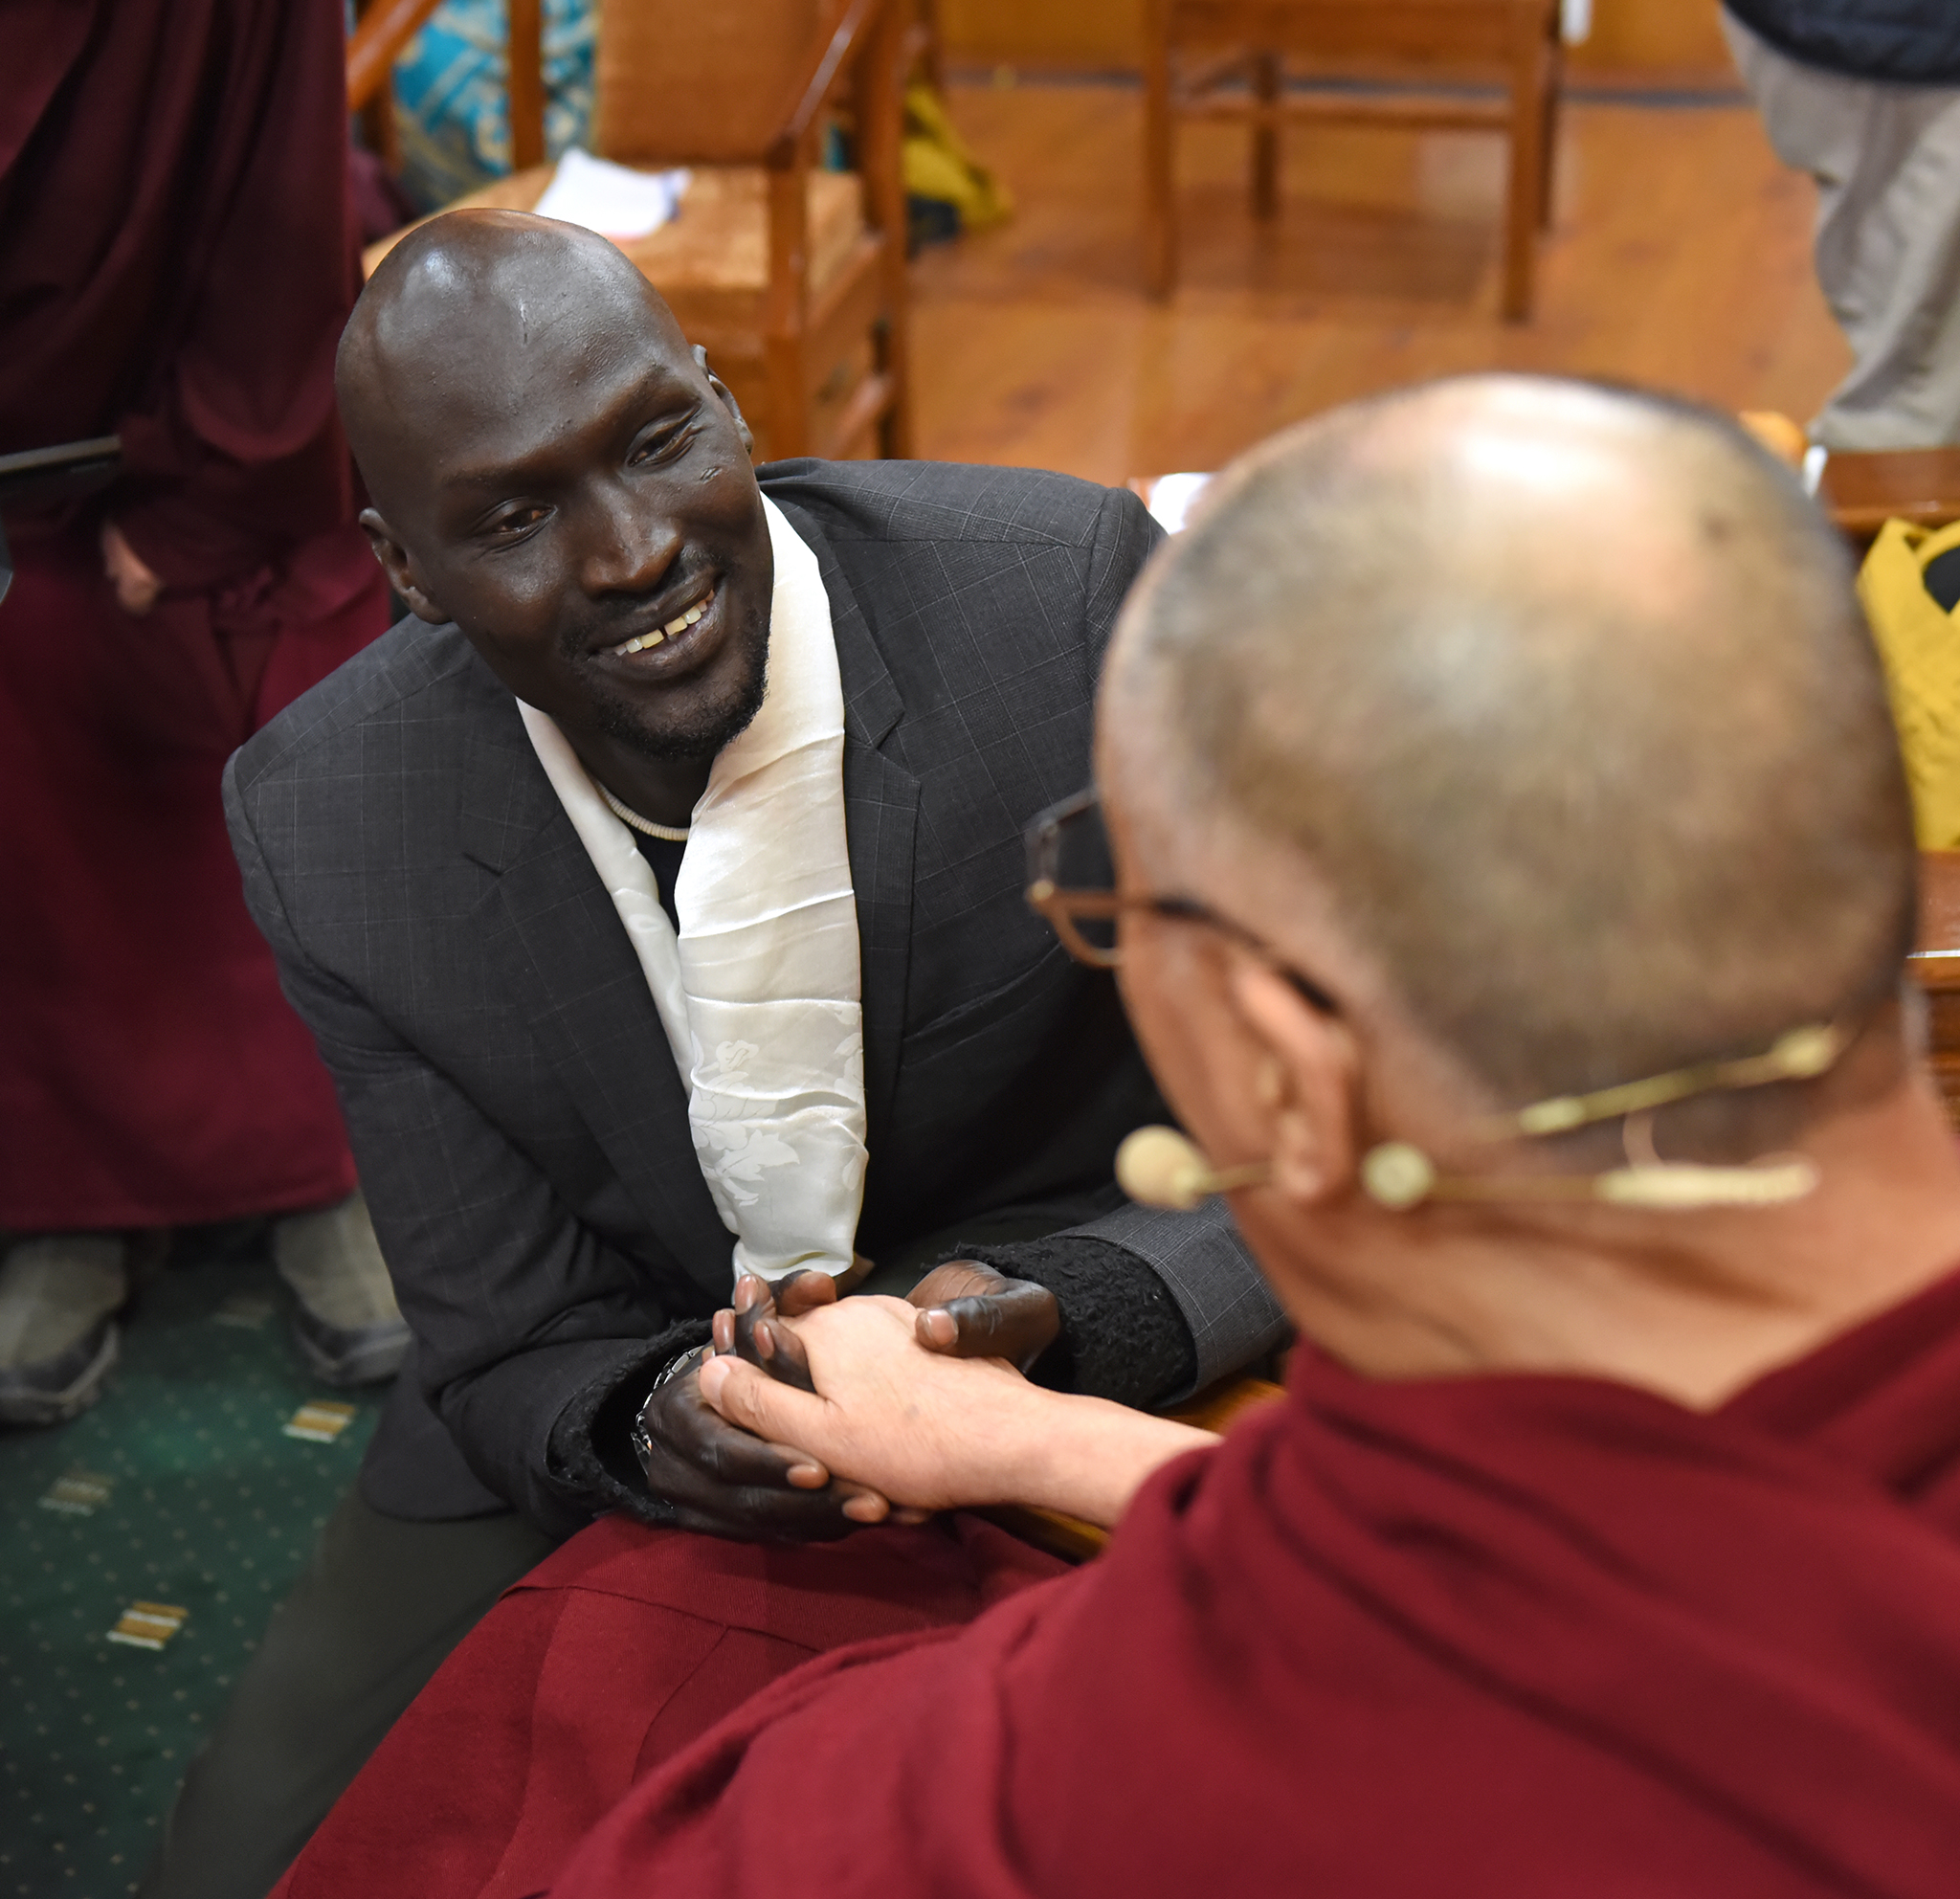 His Holiness the Dalai Lama with Ger Duany